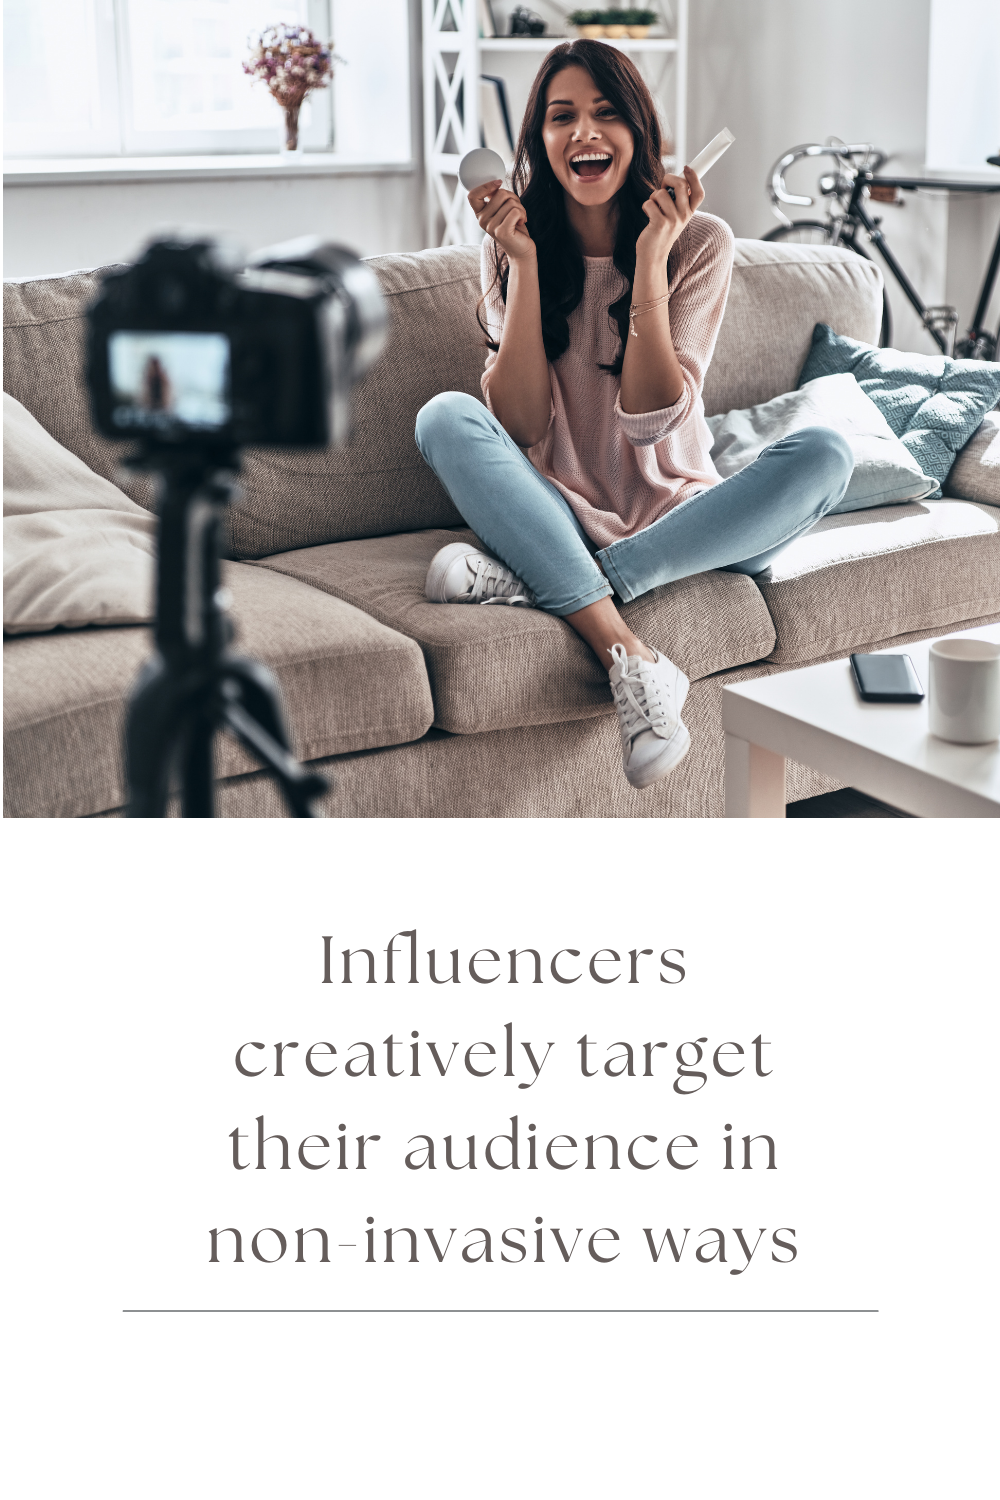 WILL INFLUENCER MARKETING OVERSHADOW THE CONVENTIONAL MARKETING IN PAKISTAN?